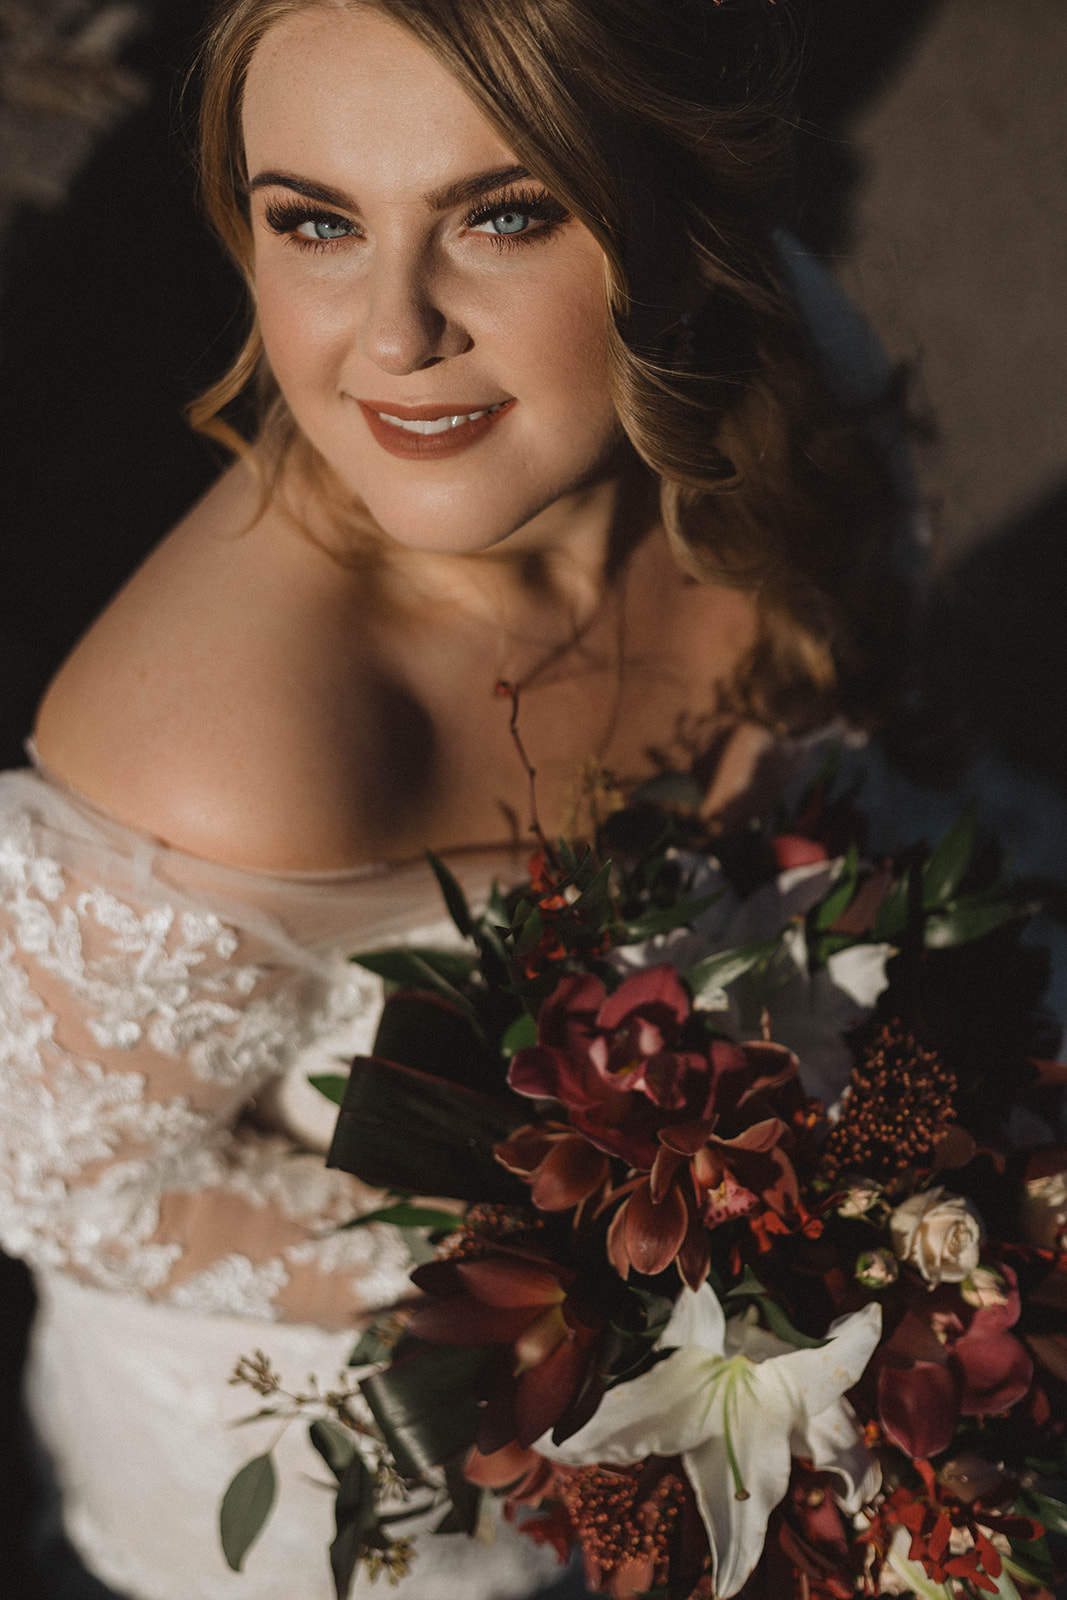 Bride in off the shoulder lace gown and makeup/hair by Rory James Vancouver